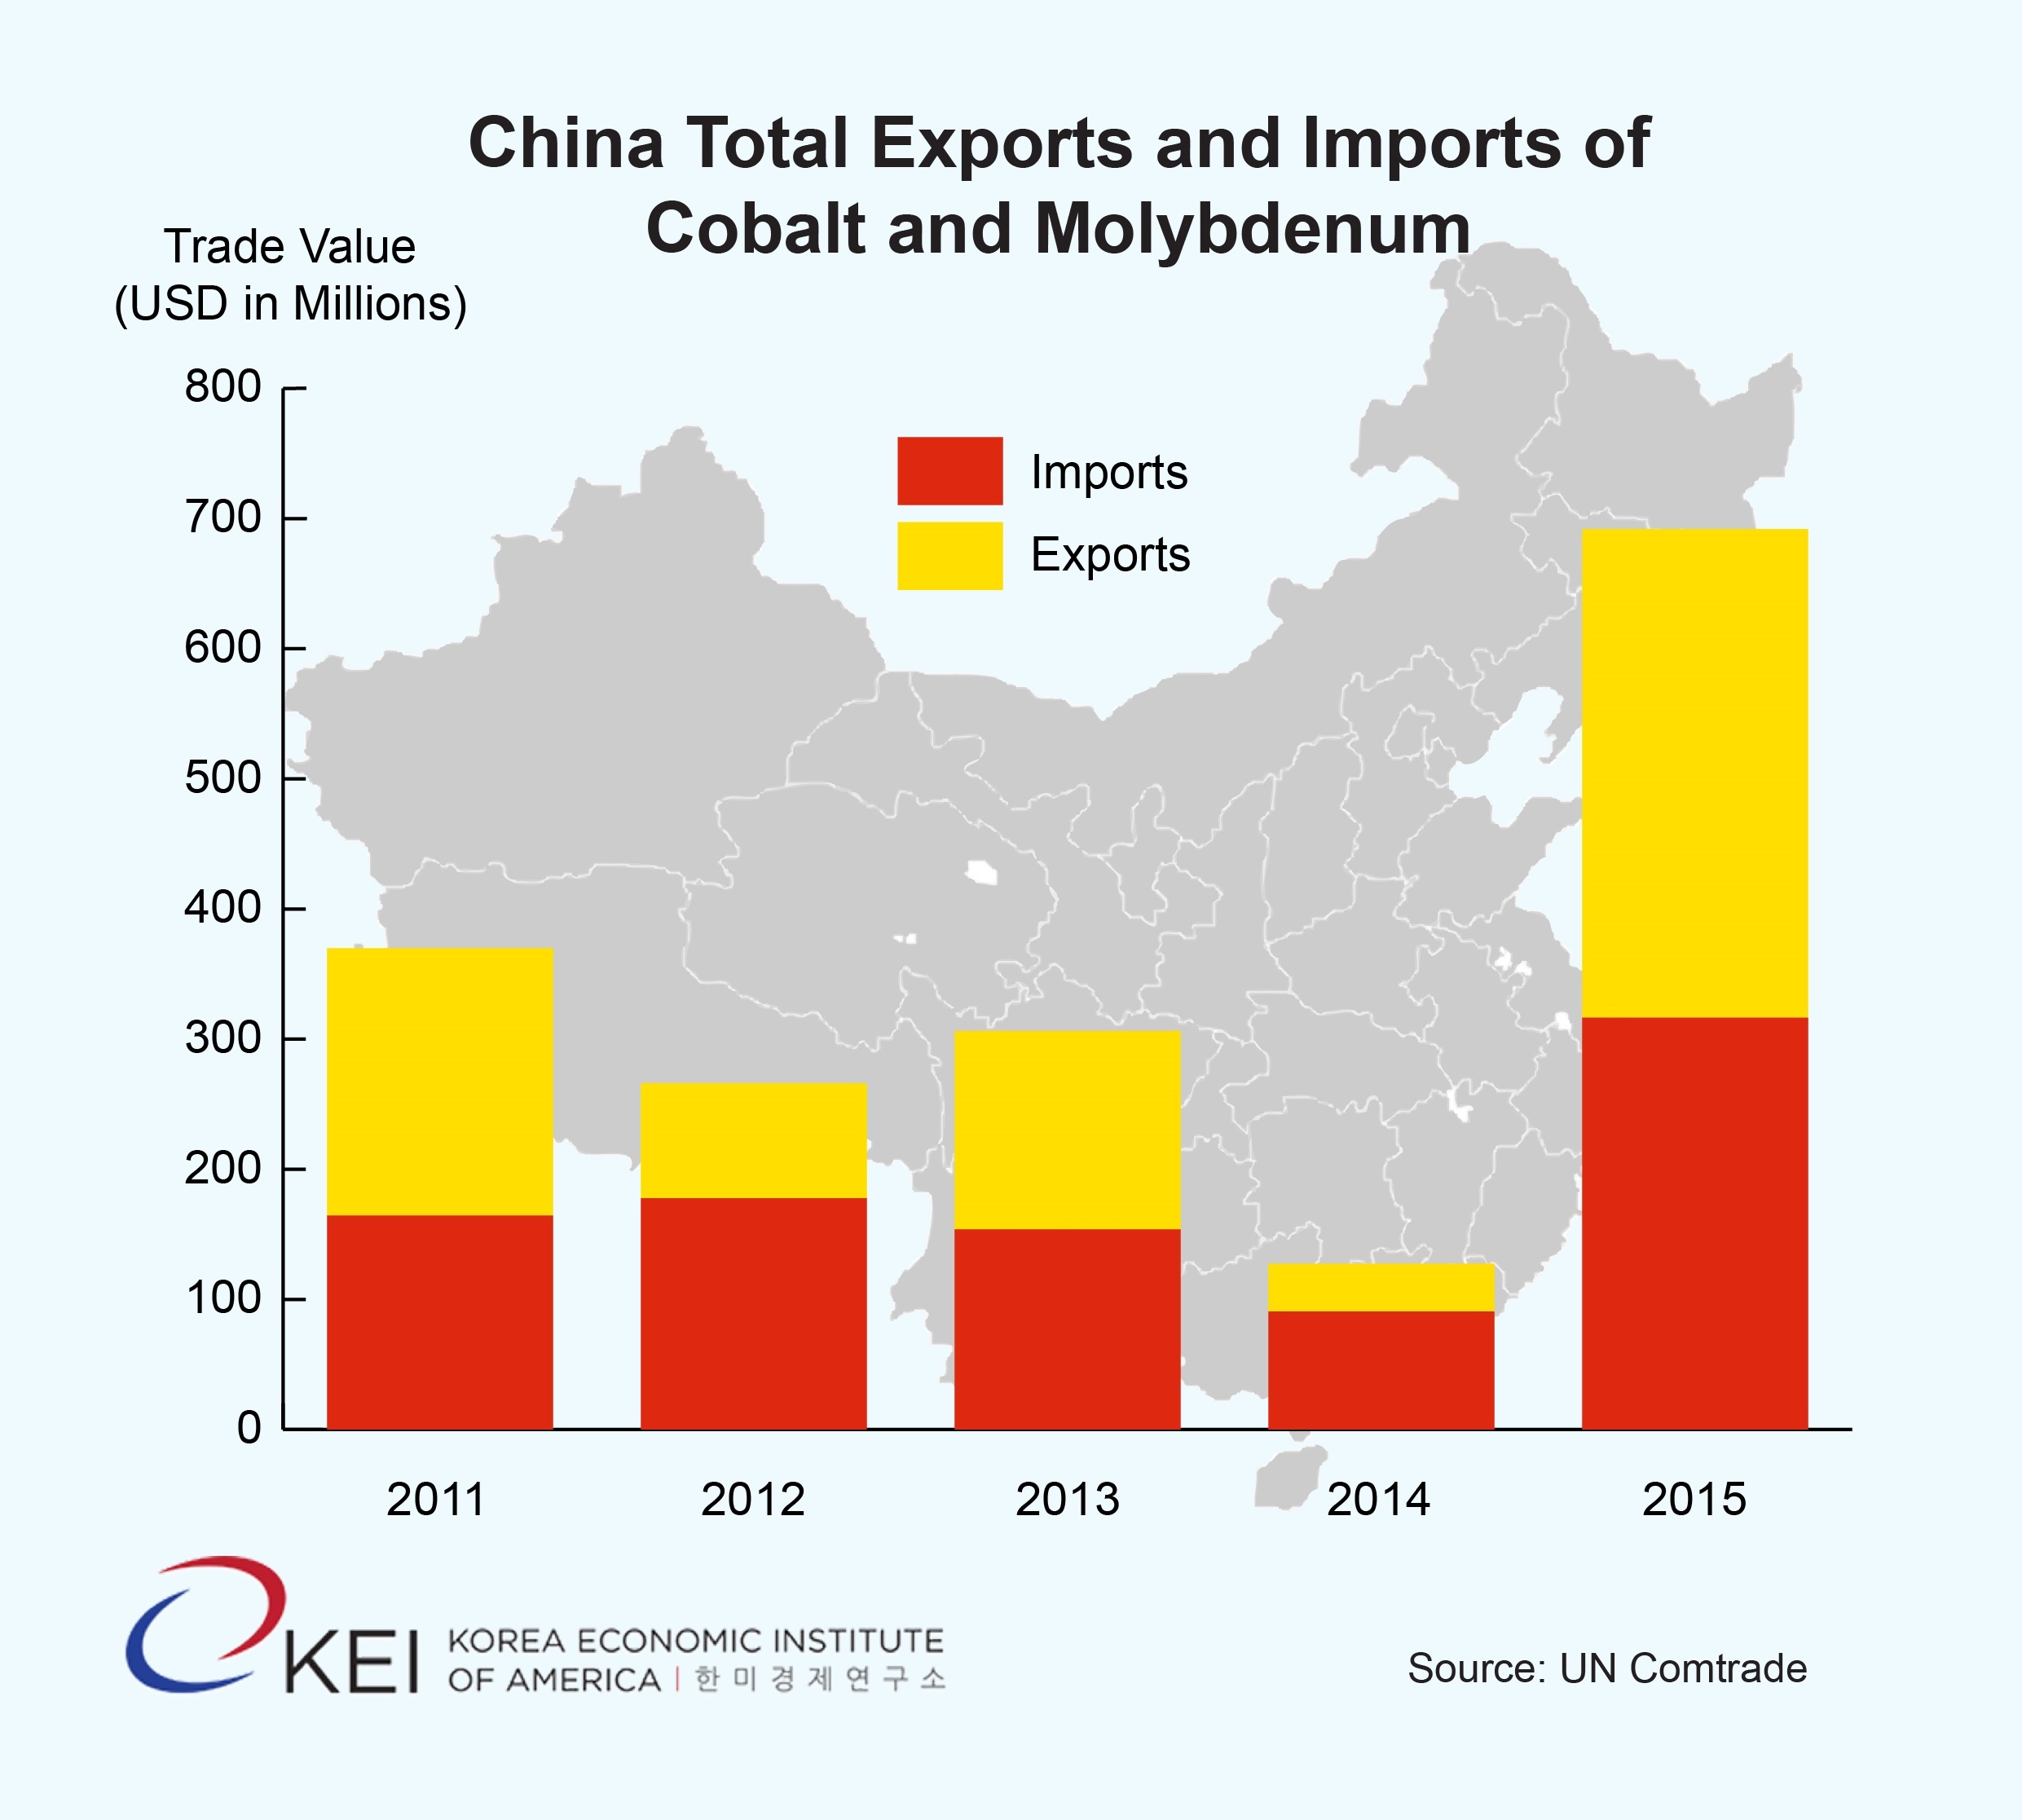 China World Exports and Imports of Cobalt and Molybdeum